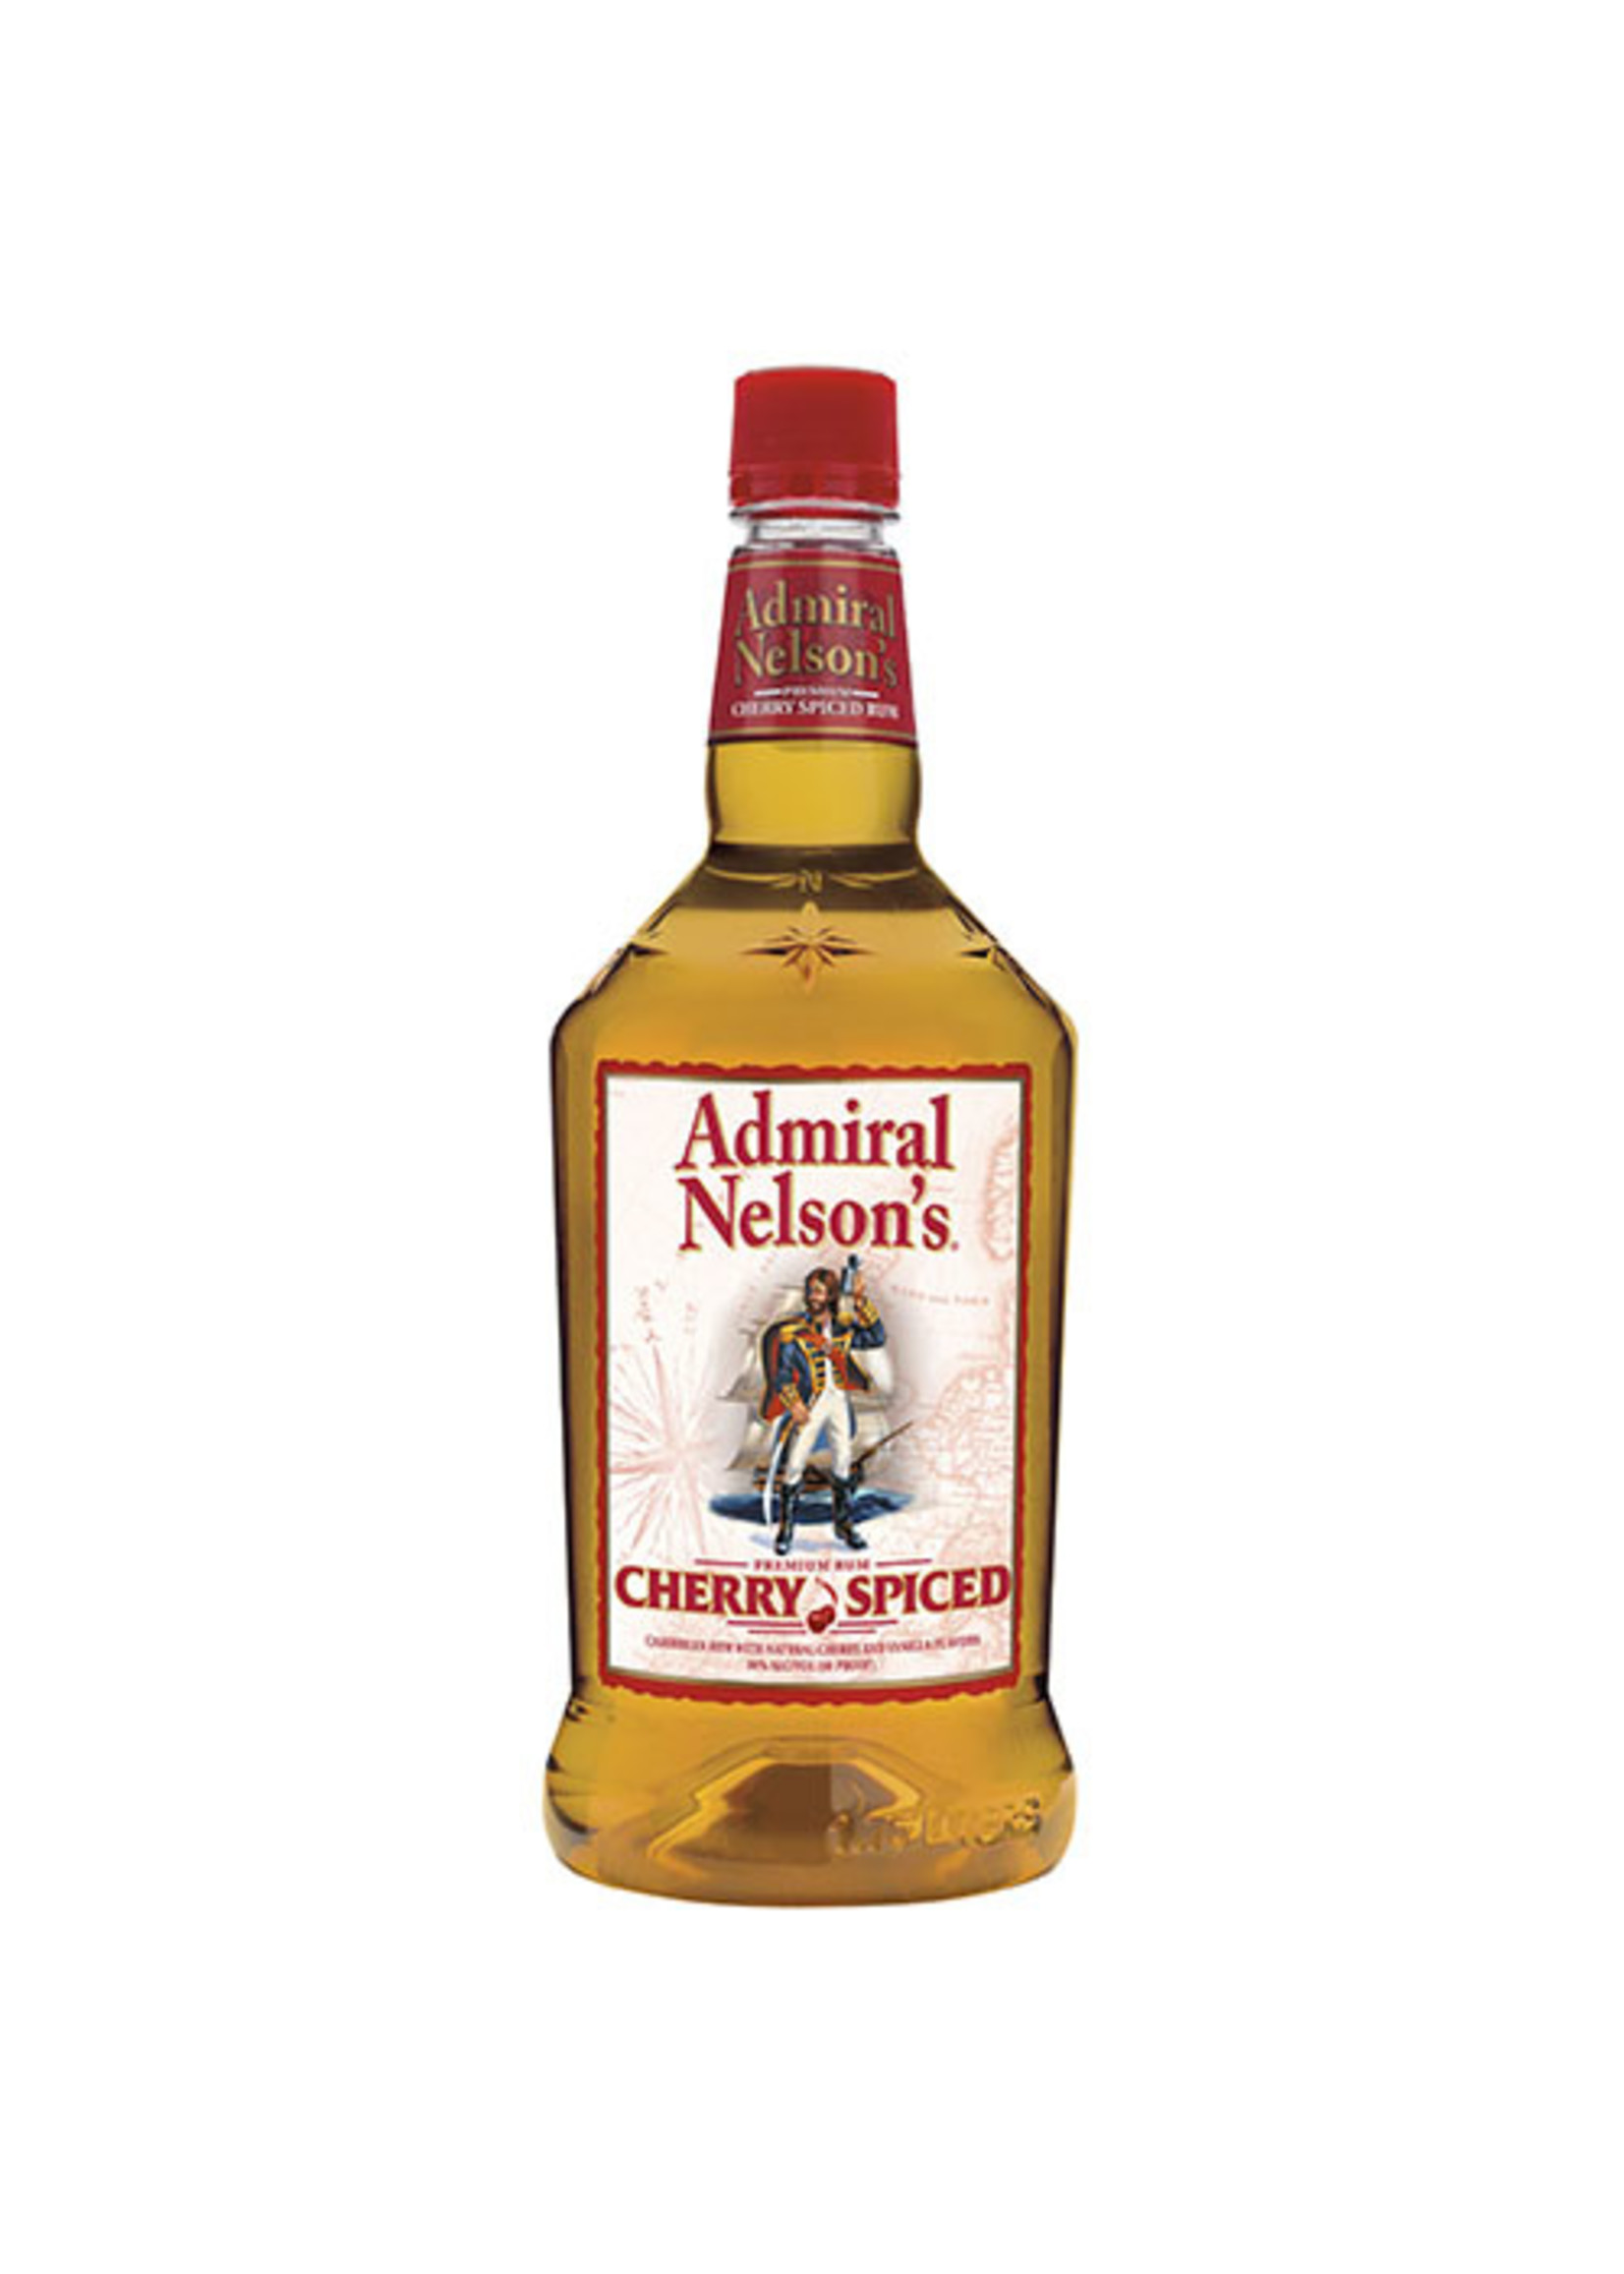 Admiral Nelson Admiral Nelson Cherry Spiced Rum 60Proof Pet 1.75 Ltr